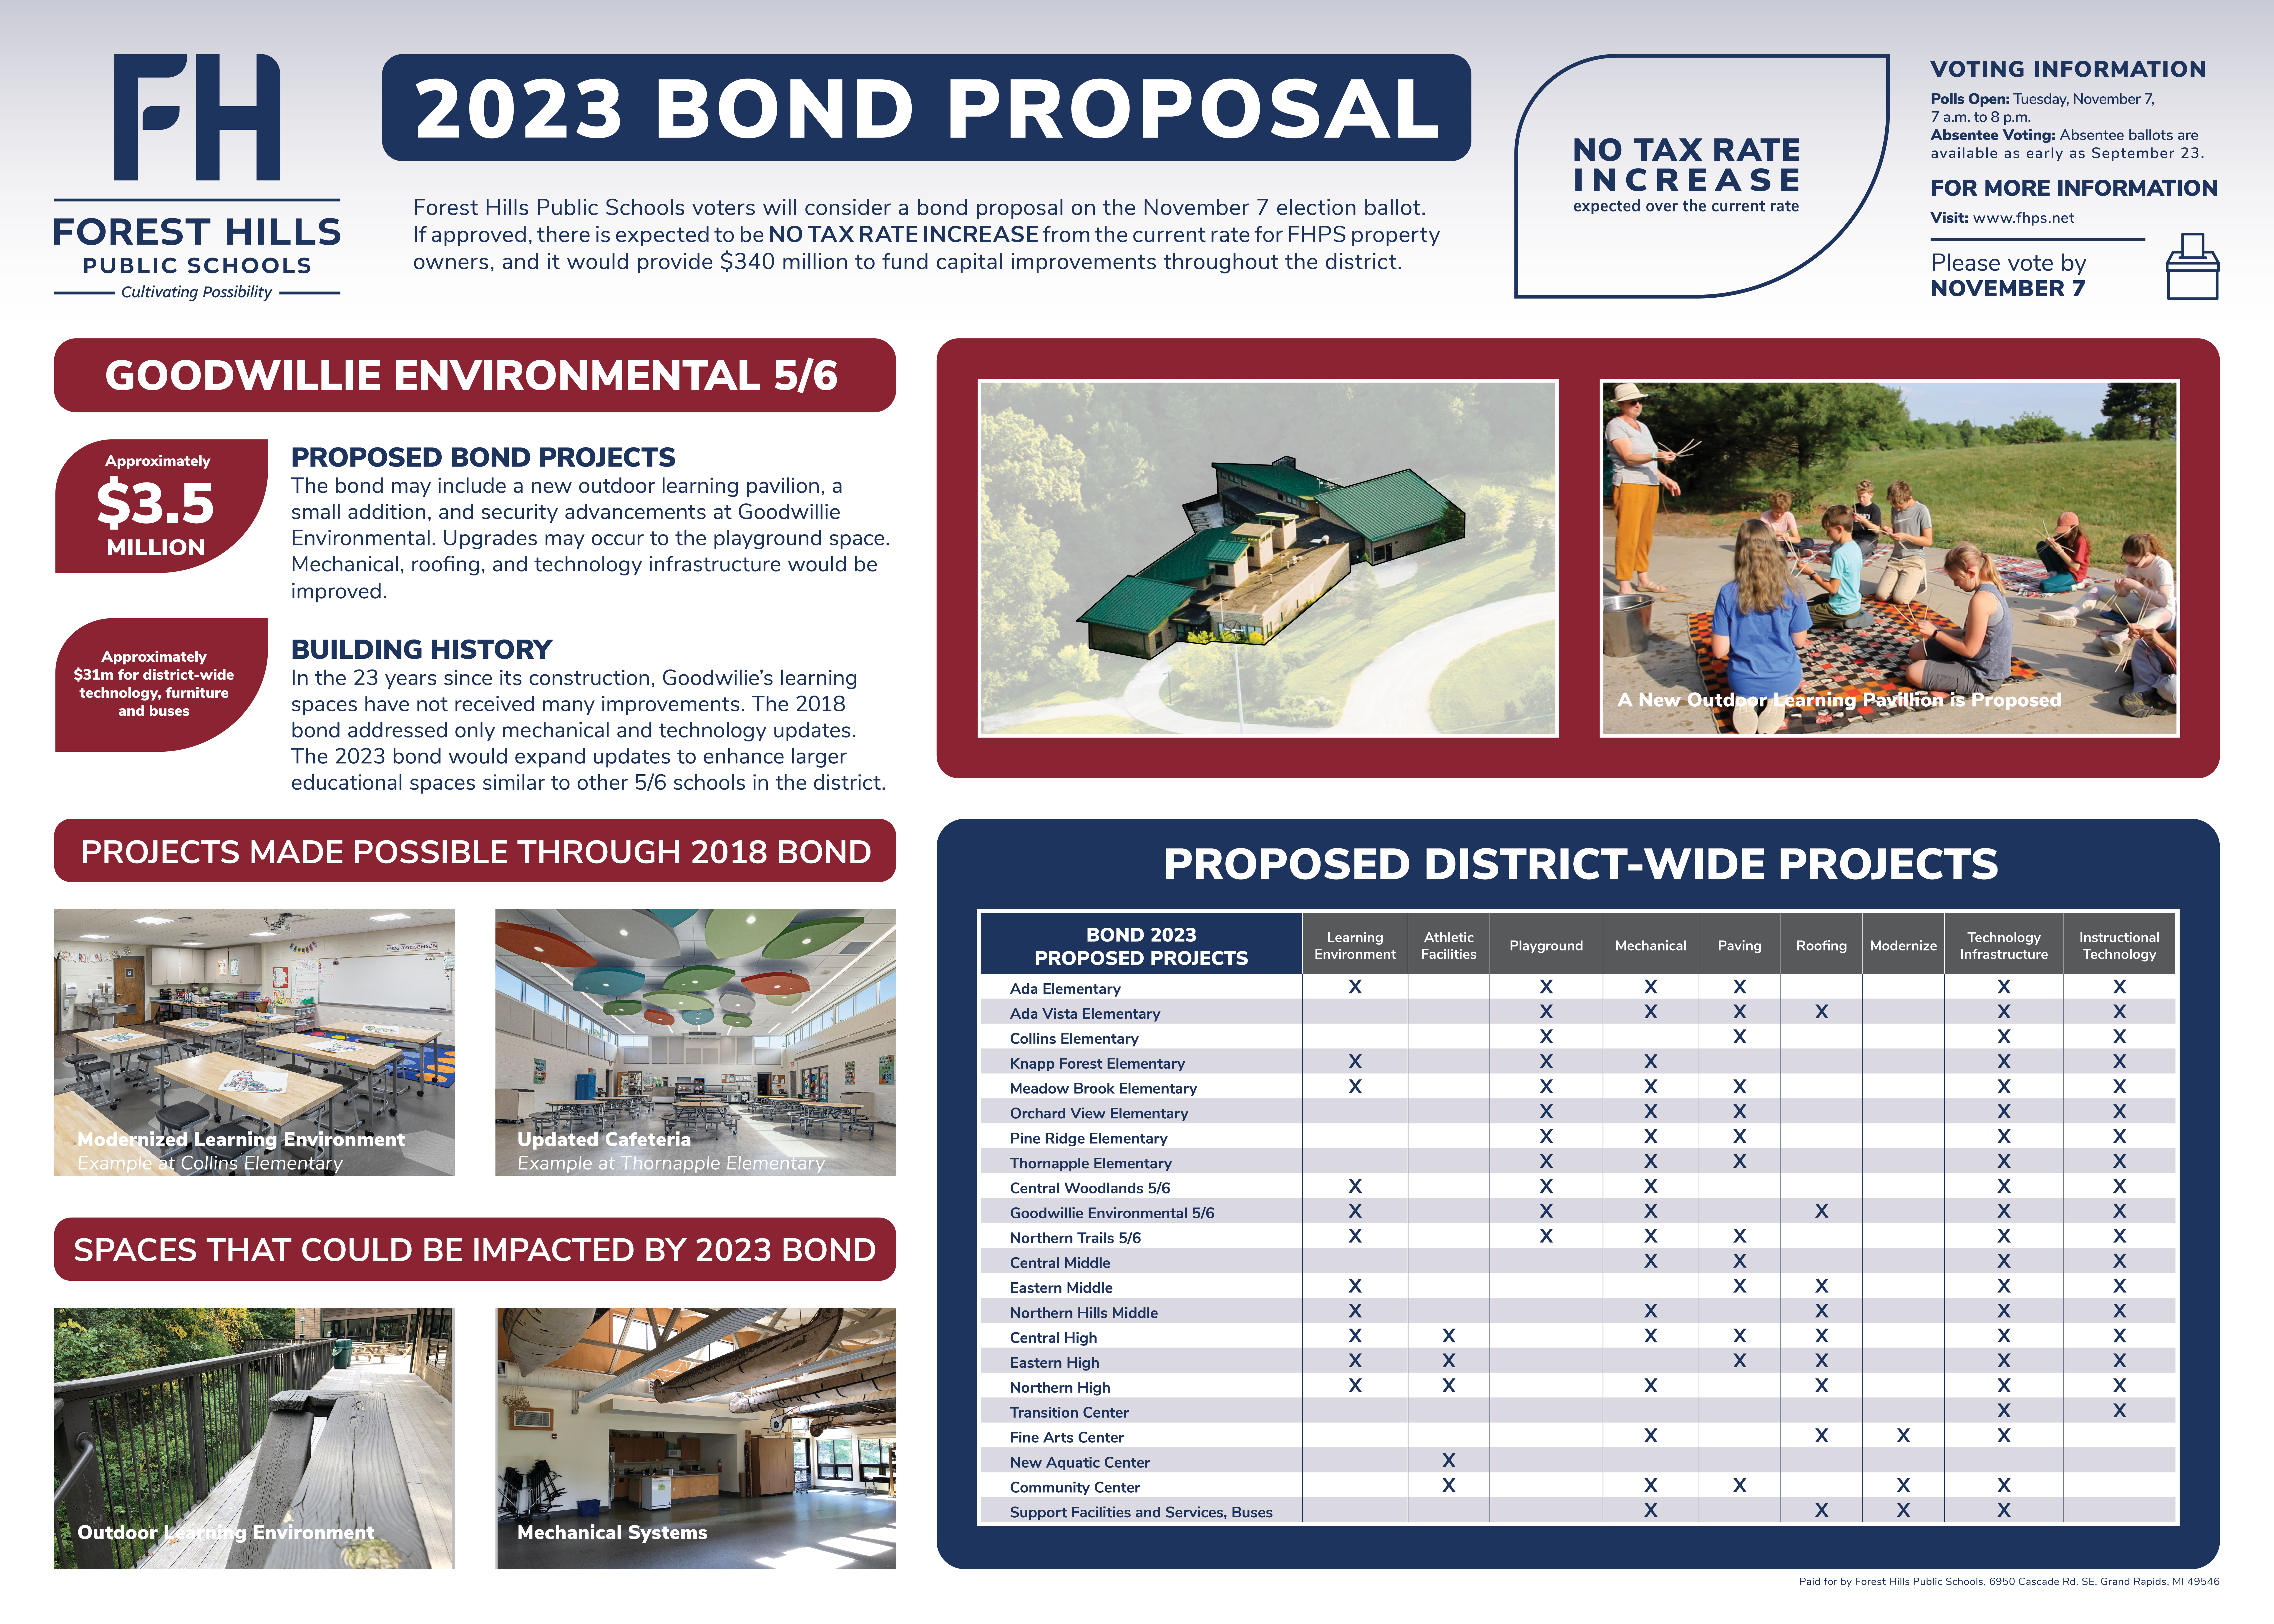 Goodwillie Environmental 5/6 school and pictures of the existing building and bond project pictures from 2018 and spaces that could be impacted by the 2023 bond.